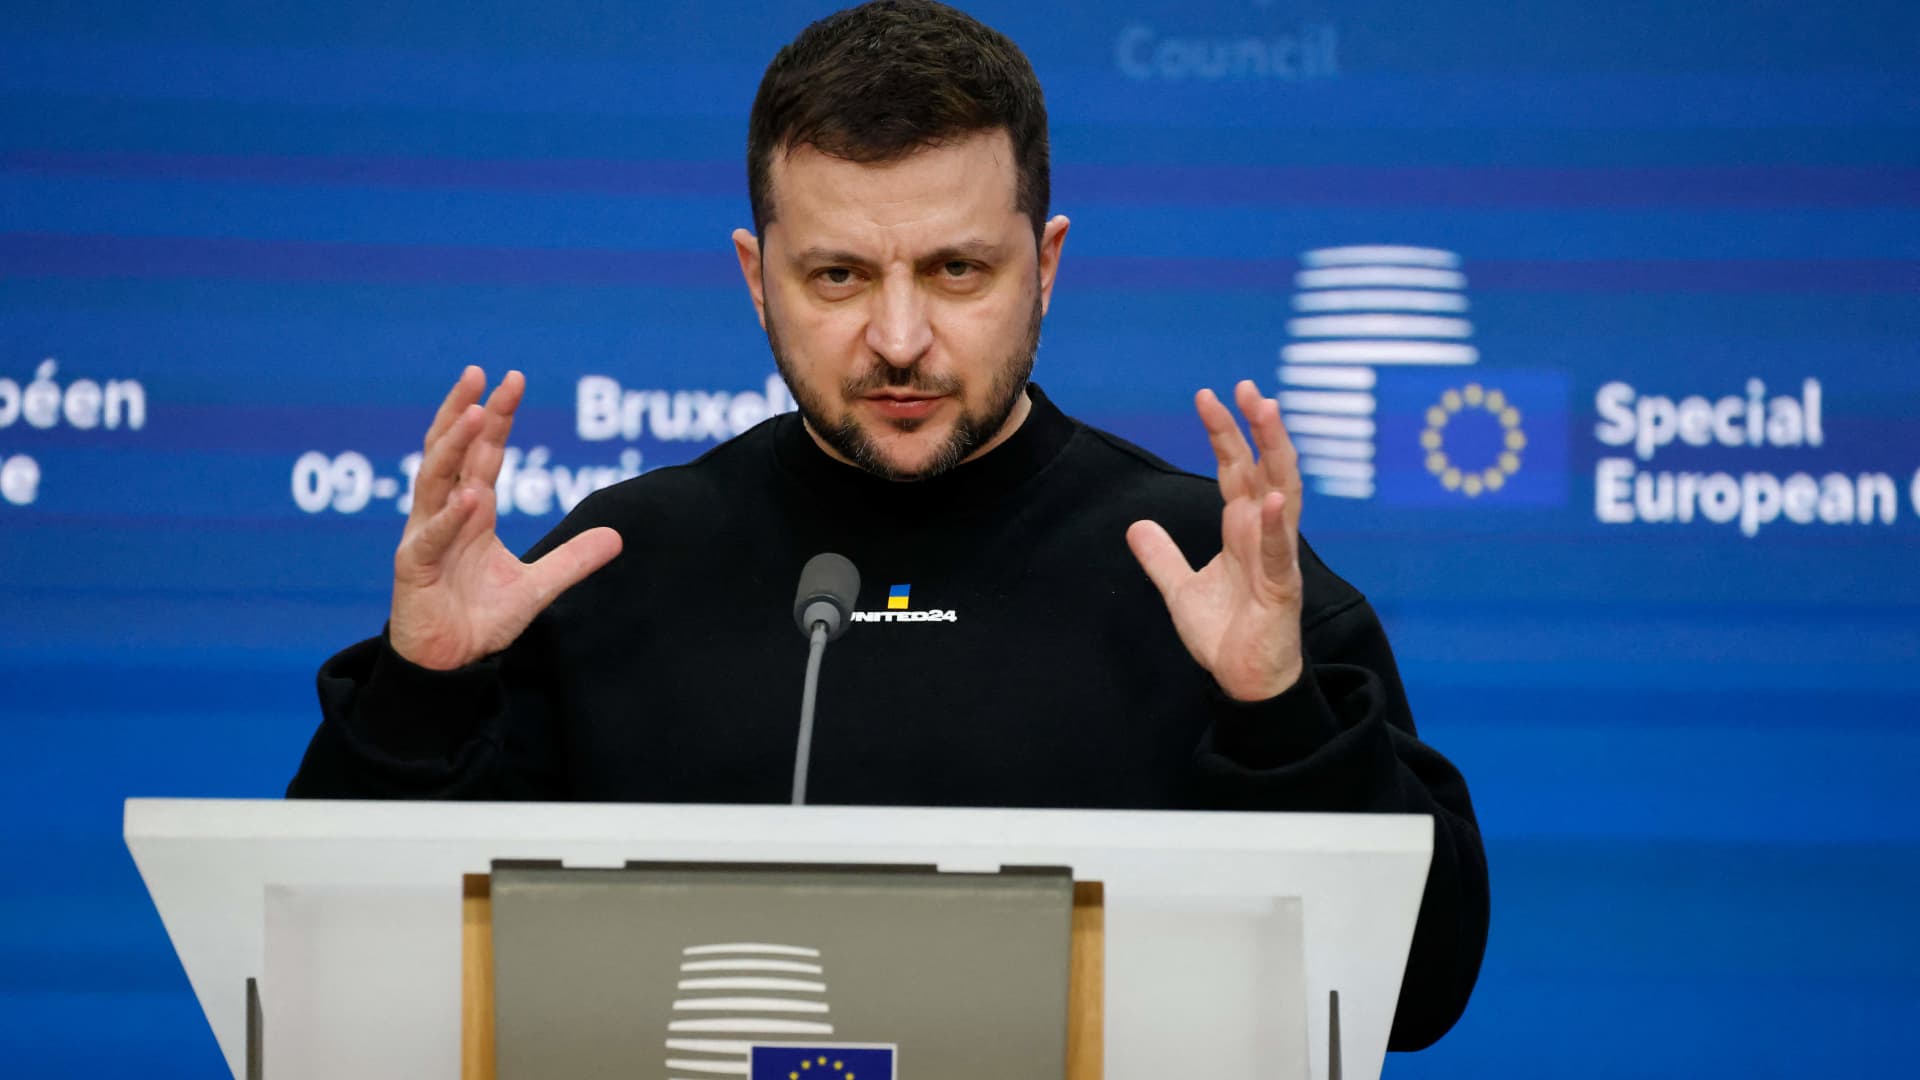 Ukraine's president Volodymyr Zelensky gives a press conference following a round-table meeting as part of a EU summit in Brussels, on February 9, 2023.